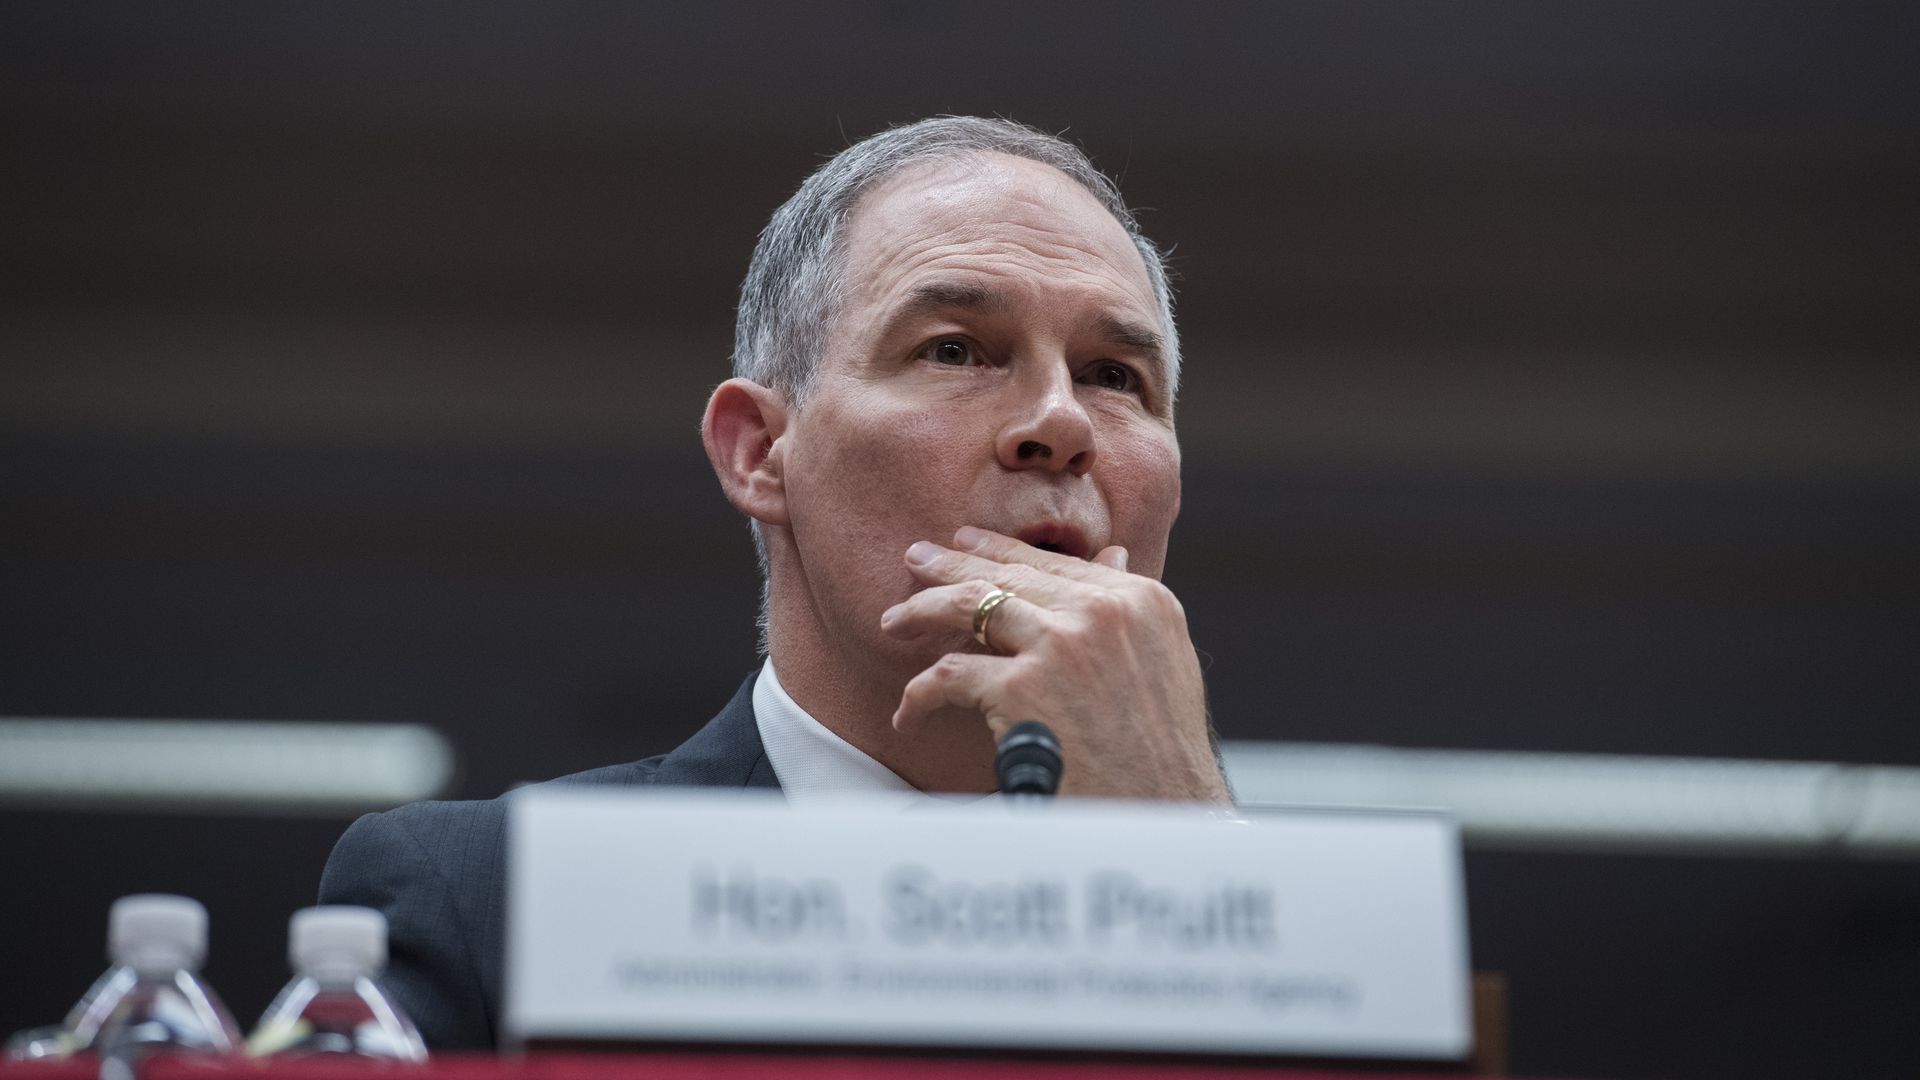 In this image, Scott Pruitt rubs his face at a hearing.